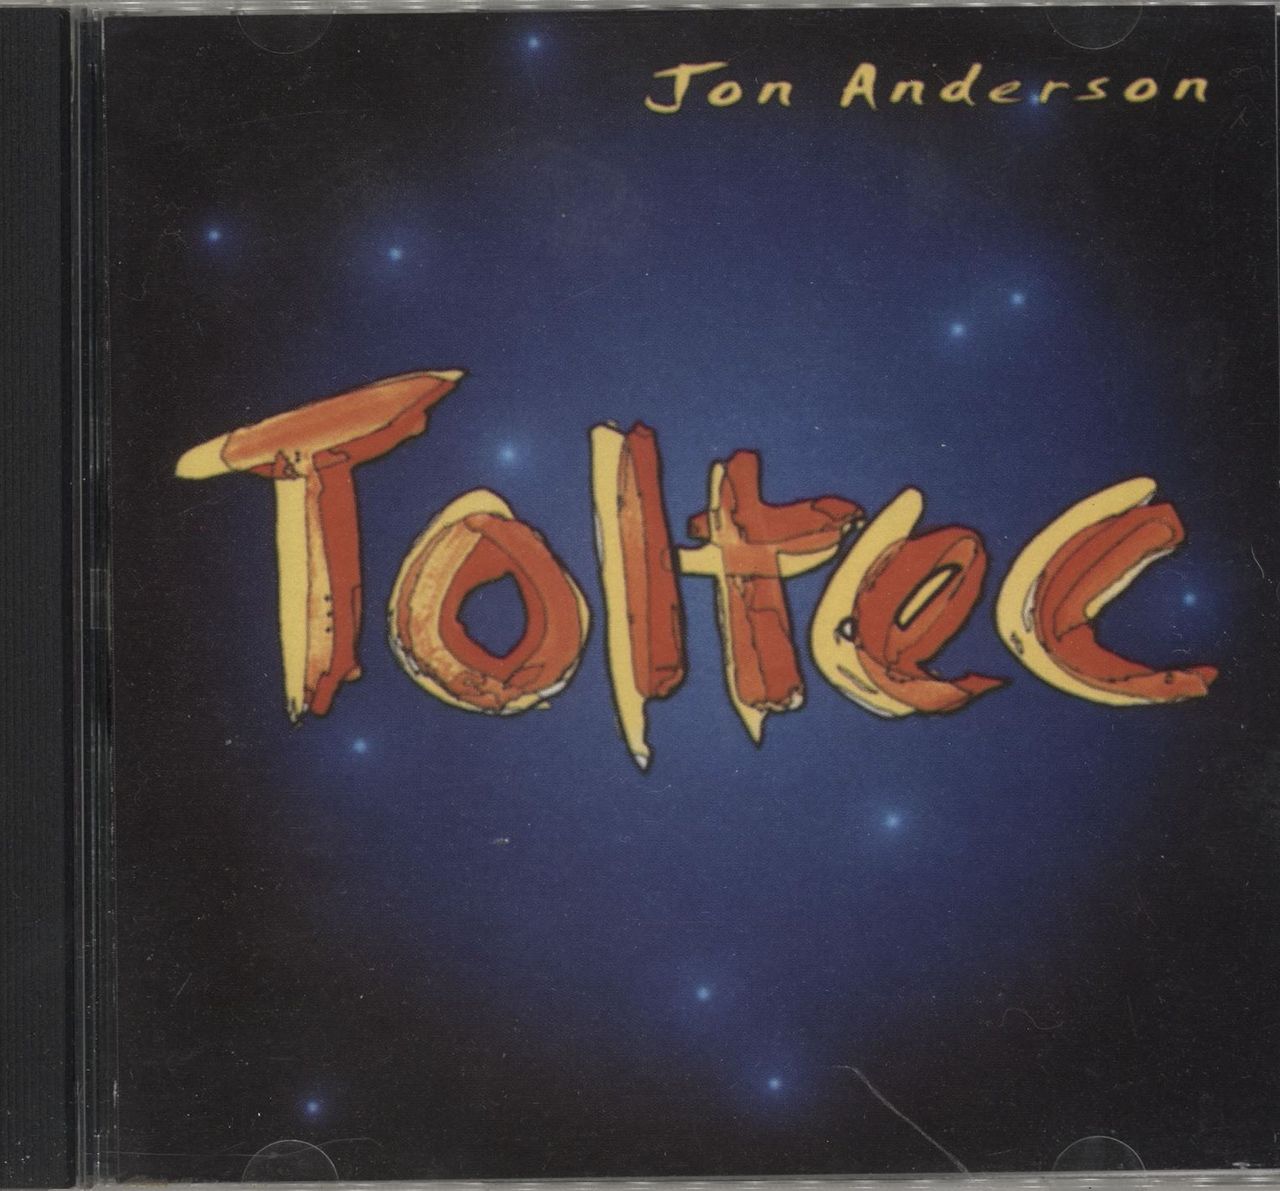 Jon Anderson Toltec - BMG Special Products US CD album (CDLP) OW35146/DRC12503